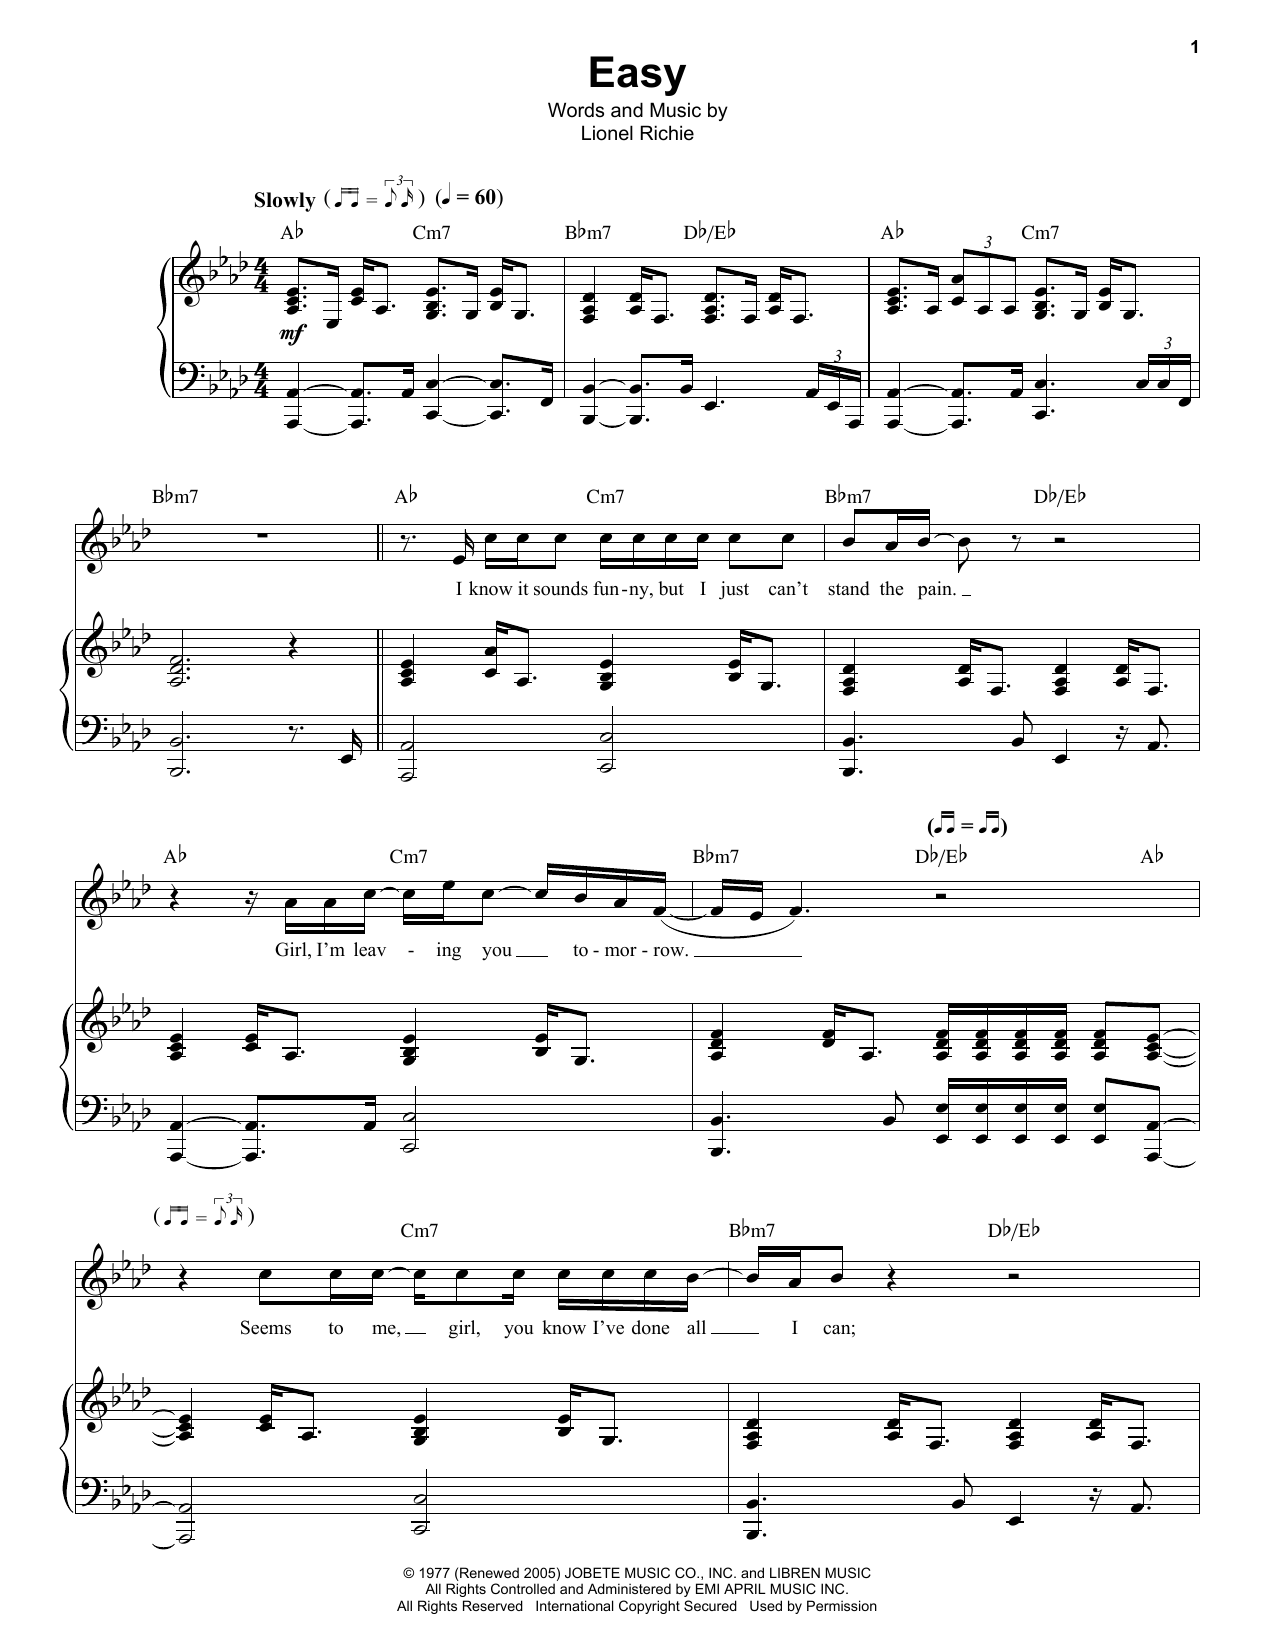 Download The Commodores Easy Sheet Music